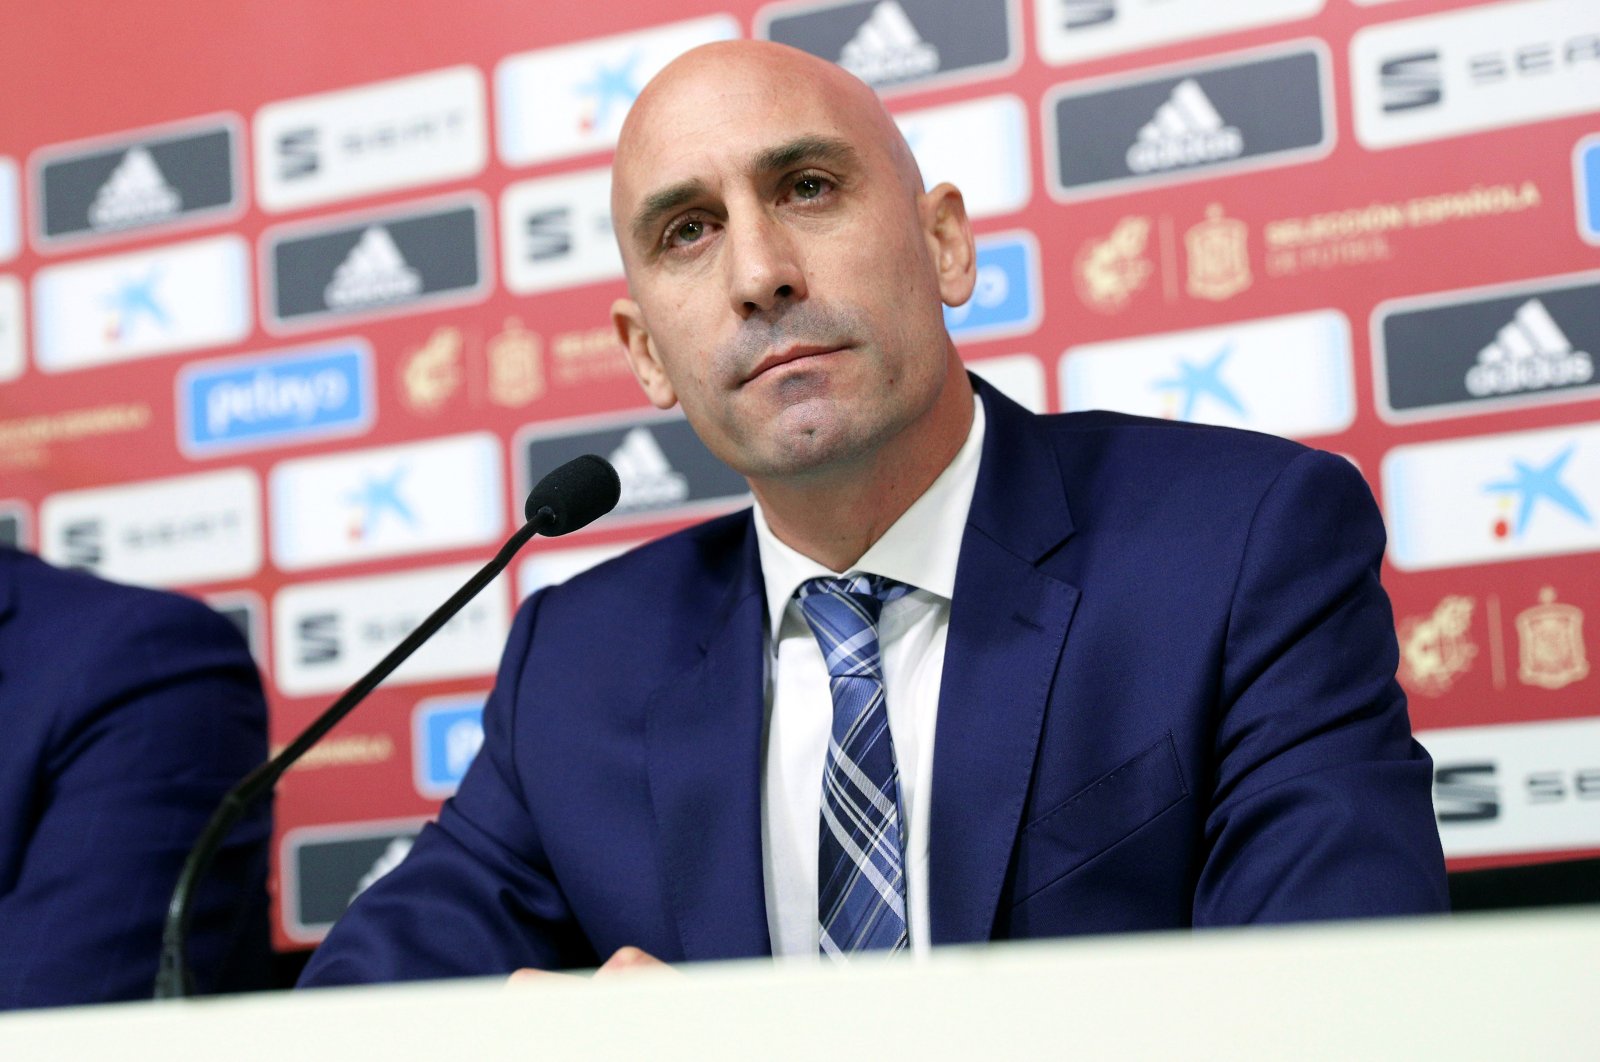 Spanish FA President Luis Rubiales at a press conference in Madrid, Spain, Nov. 2019. (EPA Photo)